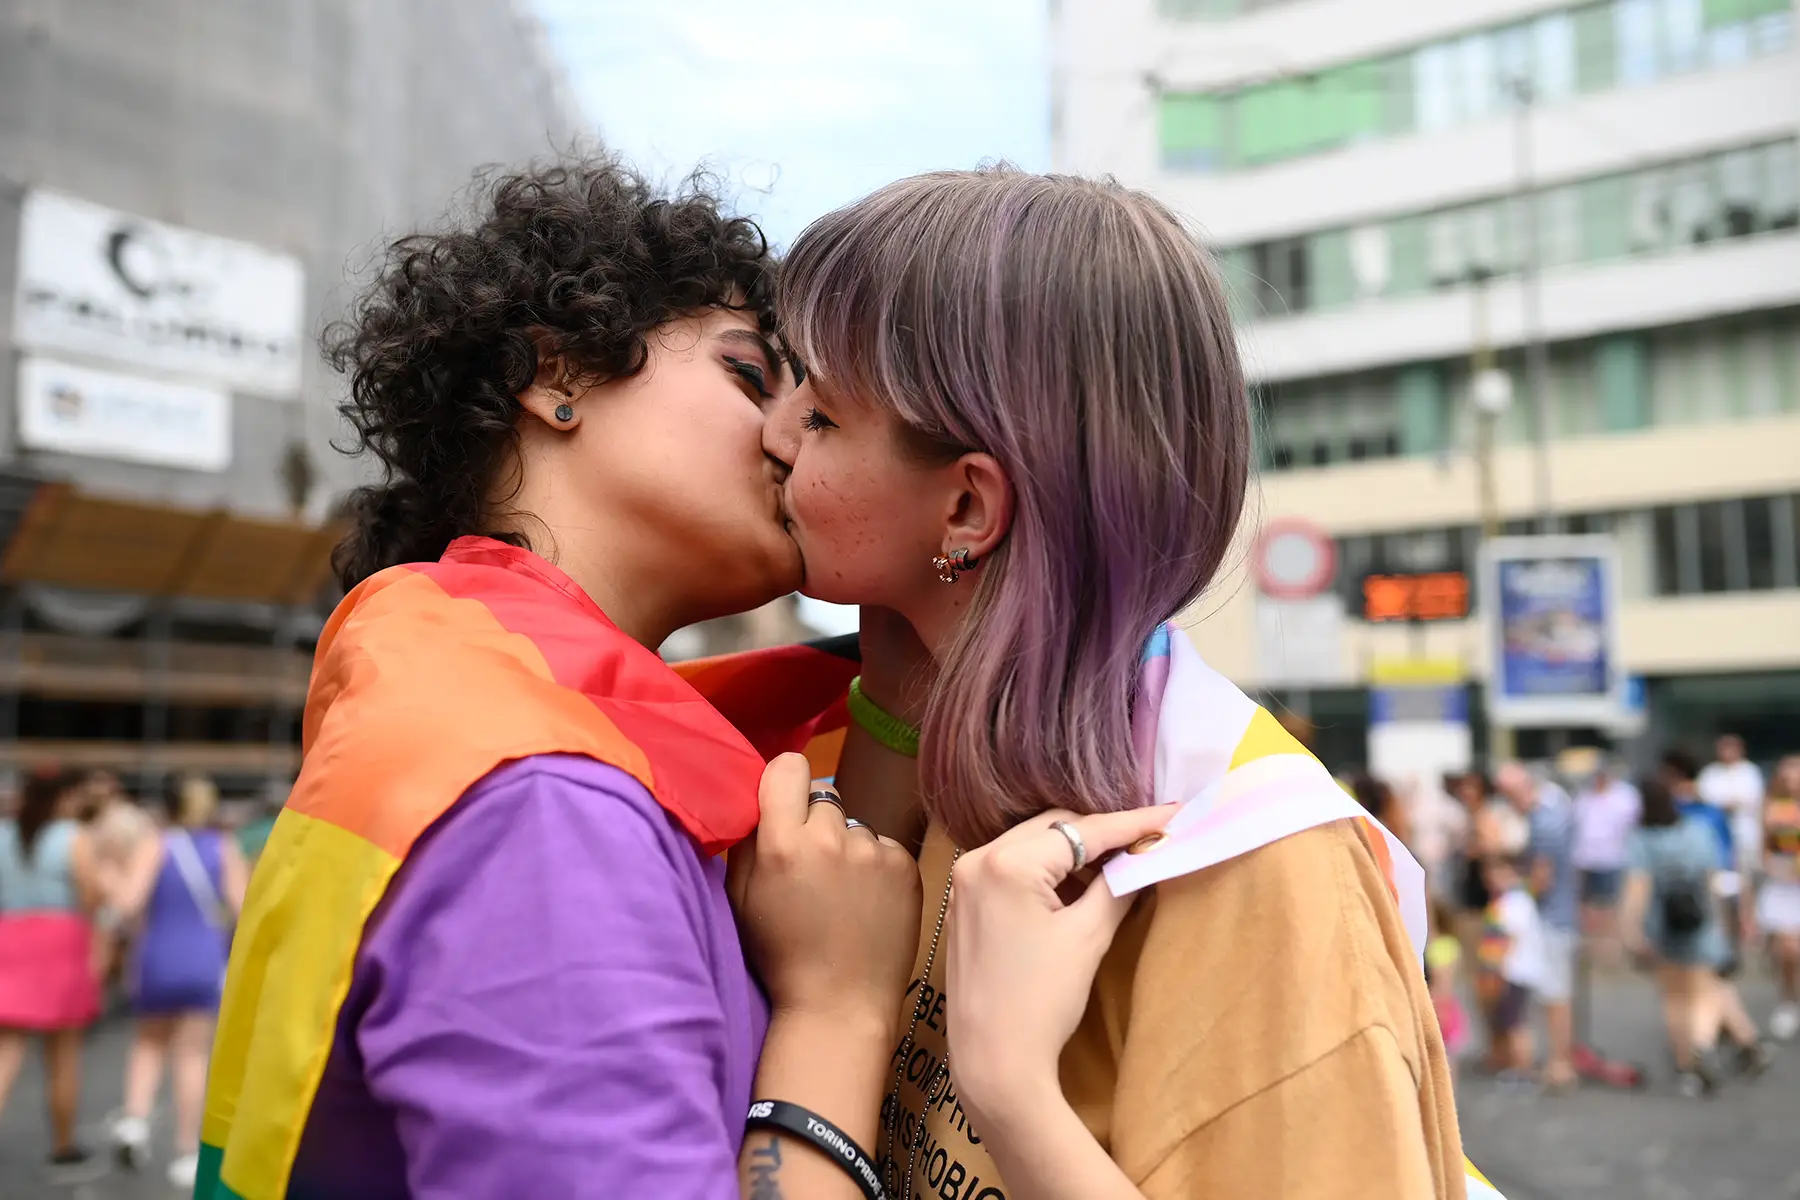 Young women kissing, wrapped in a rainbow flag